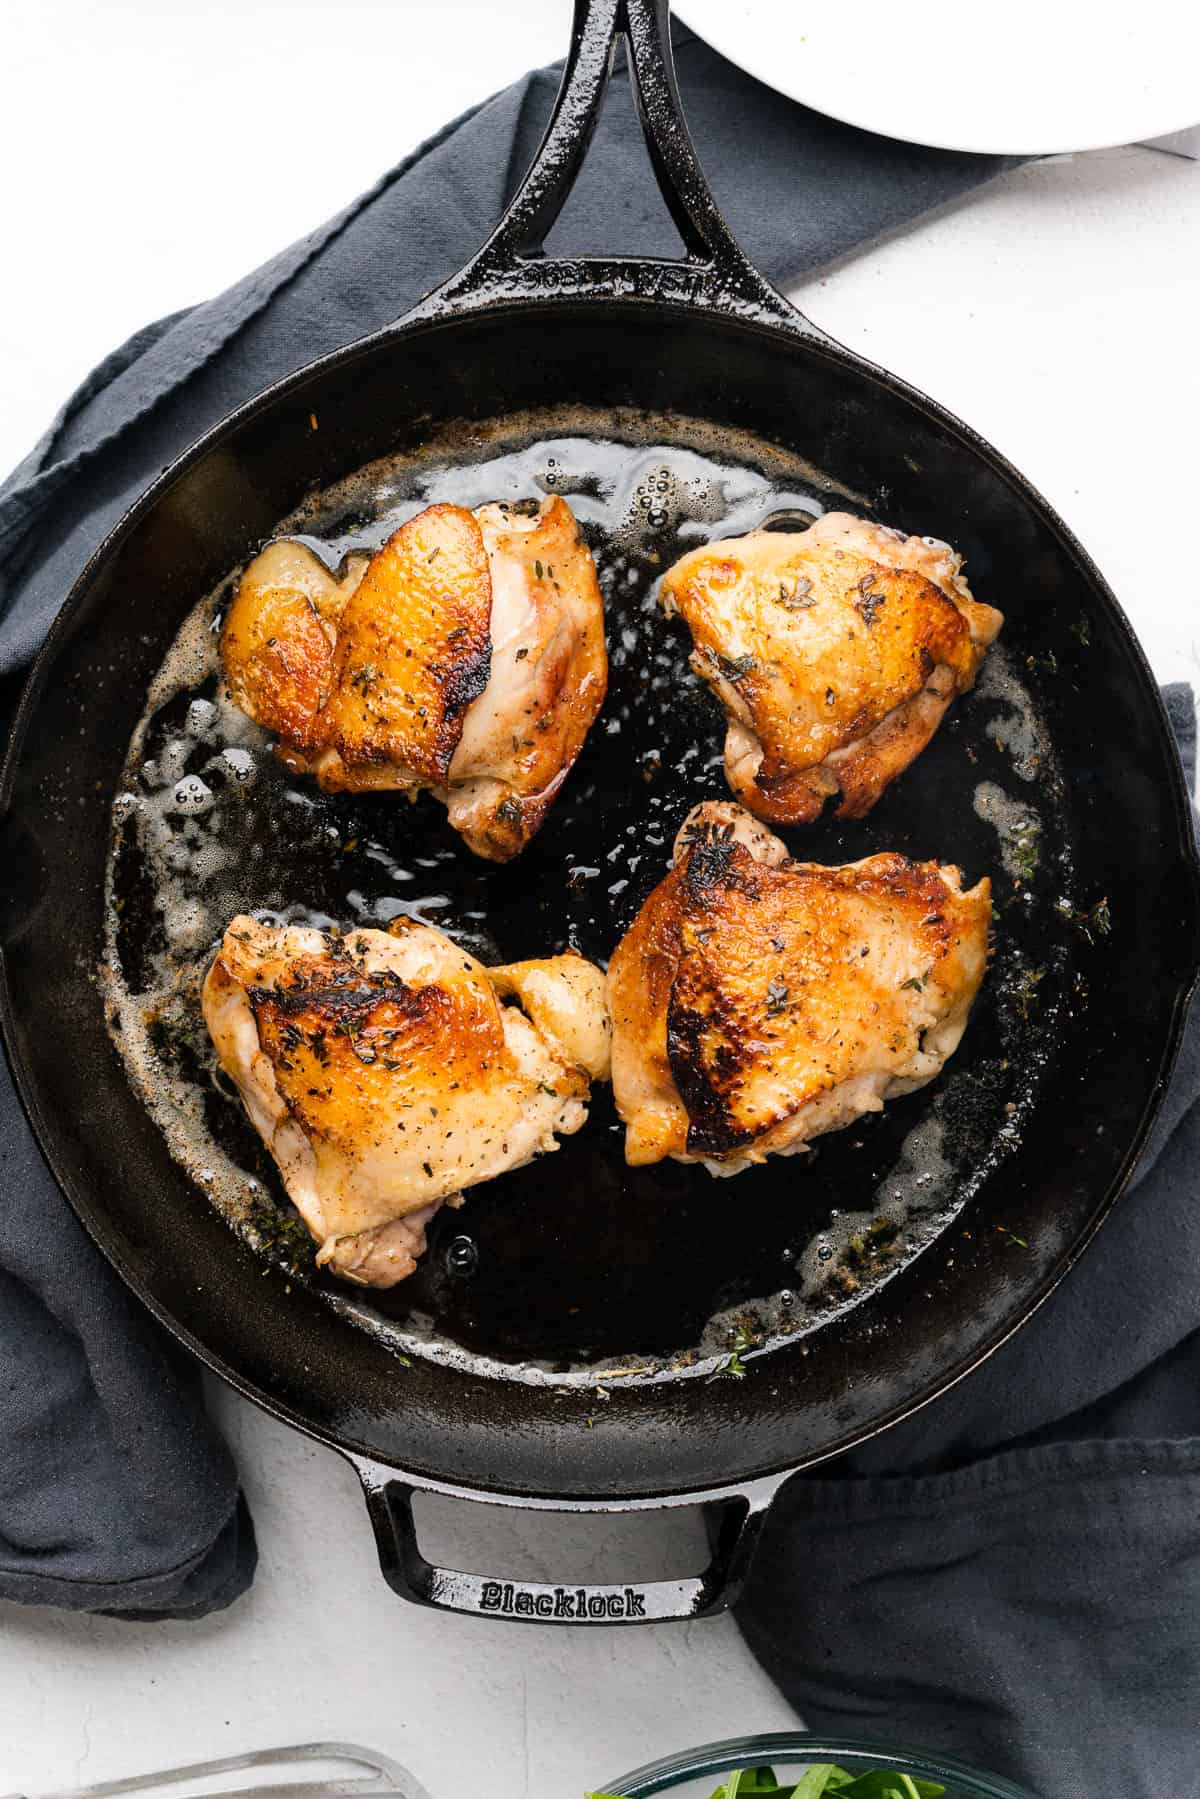 Seared chicken thighs in a cast iron skillet